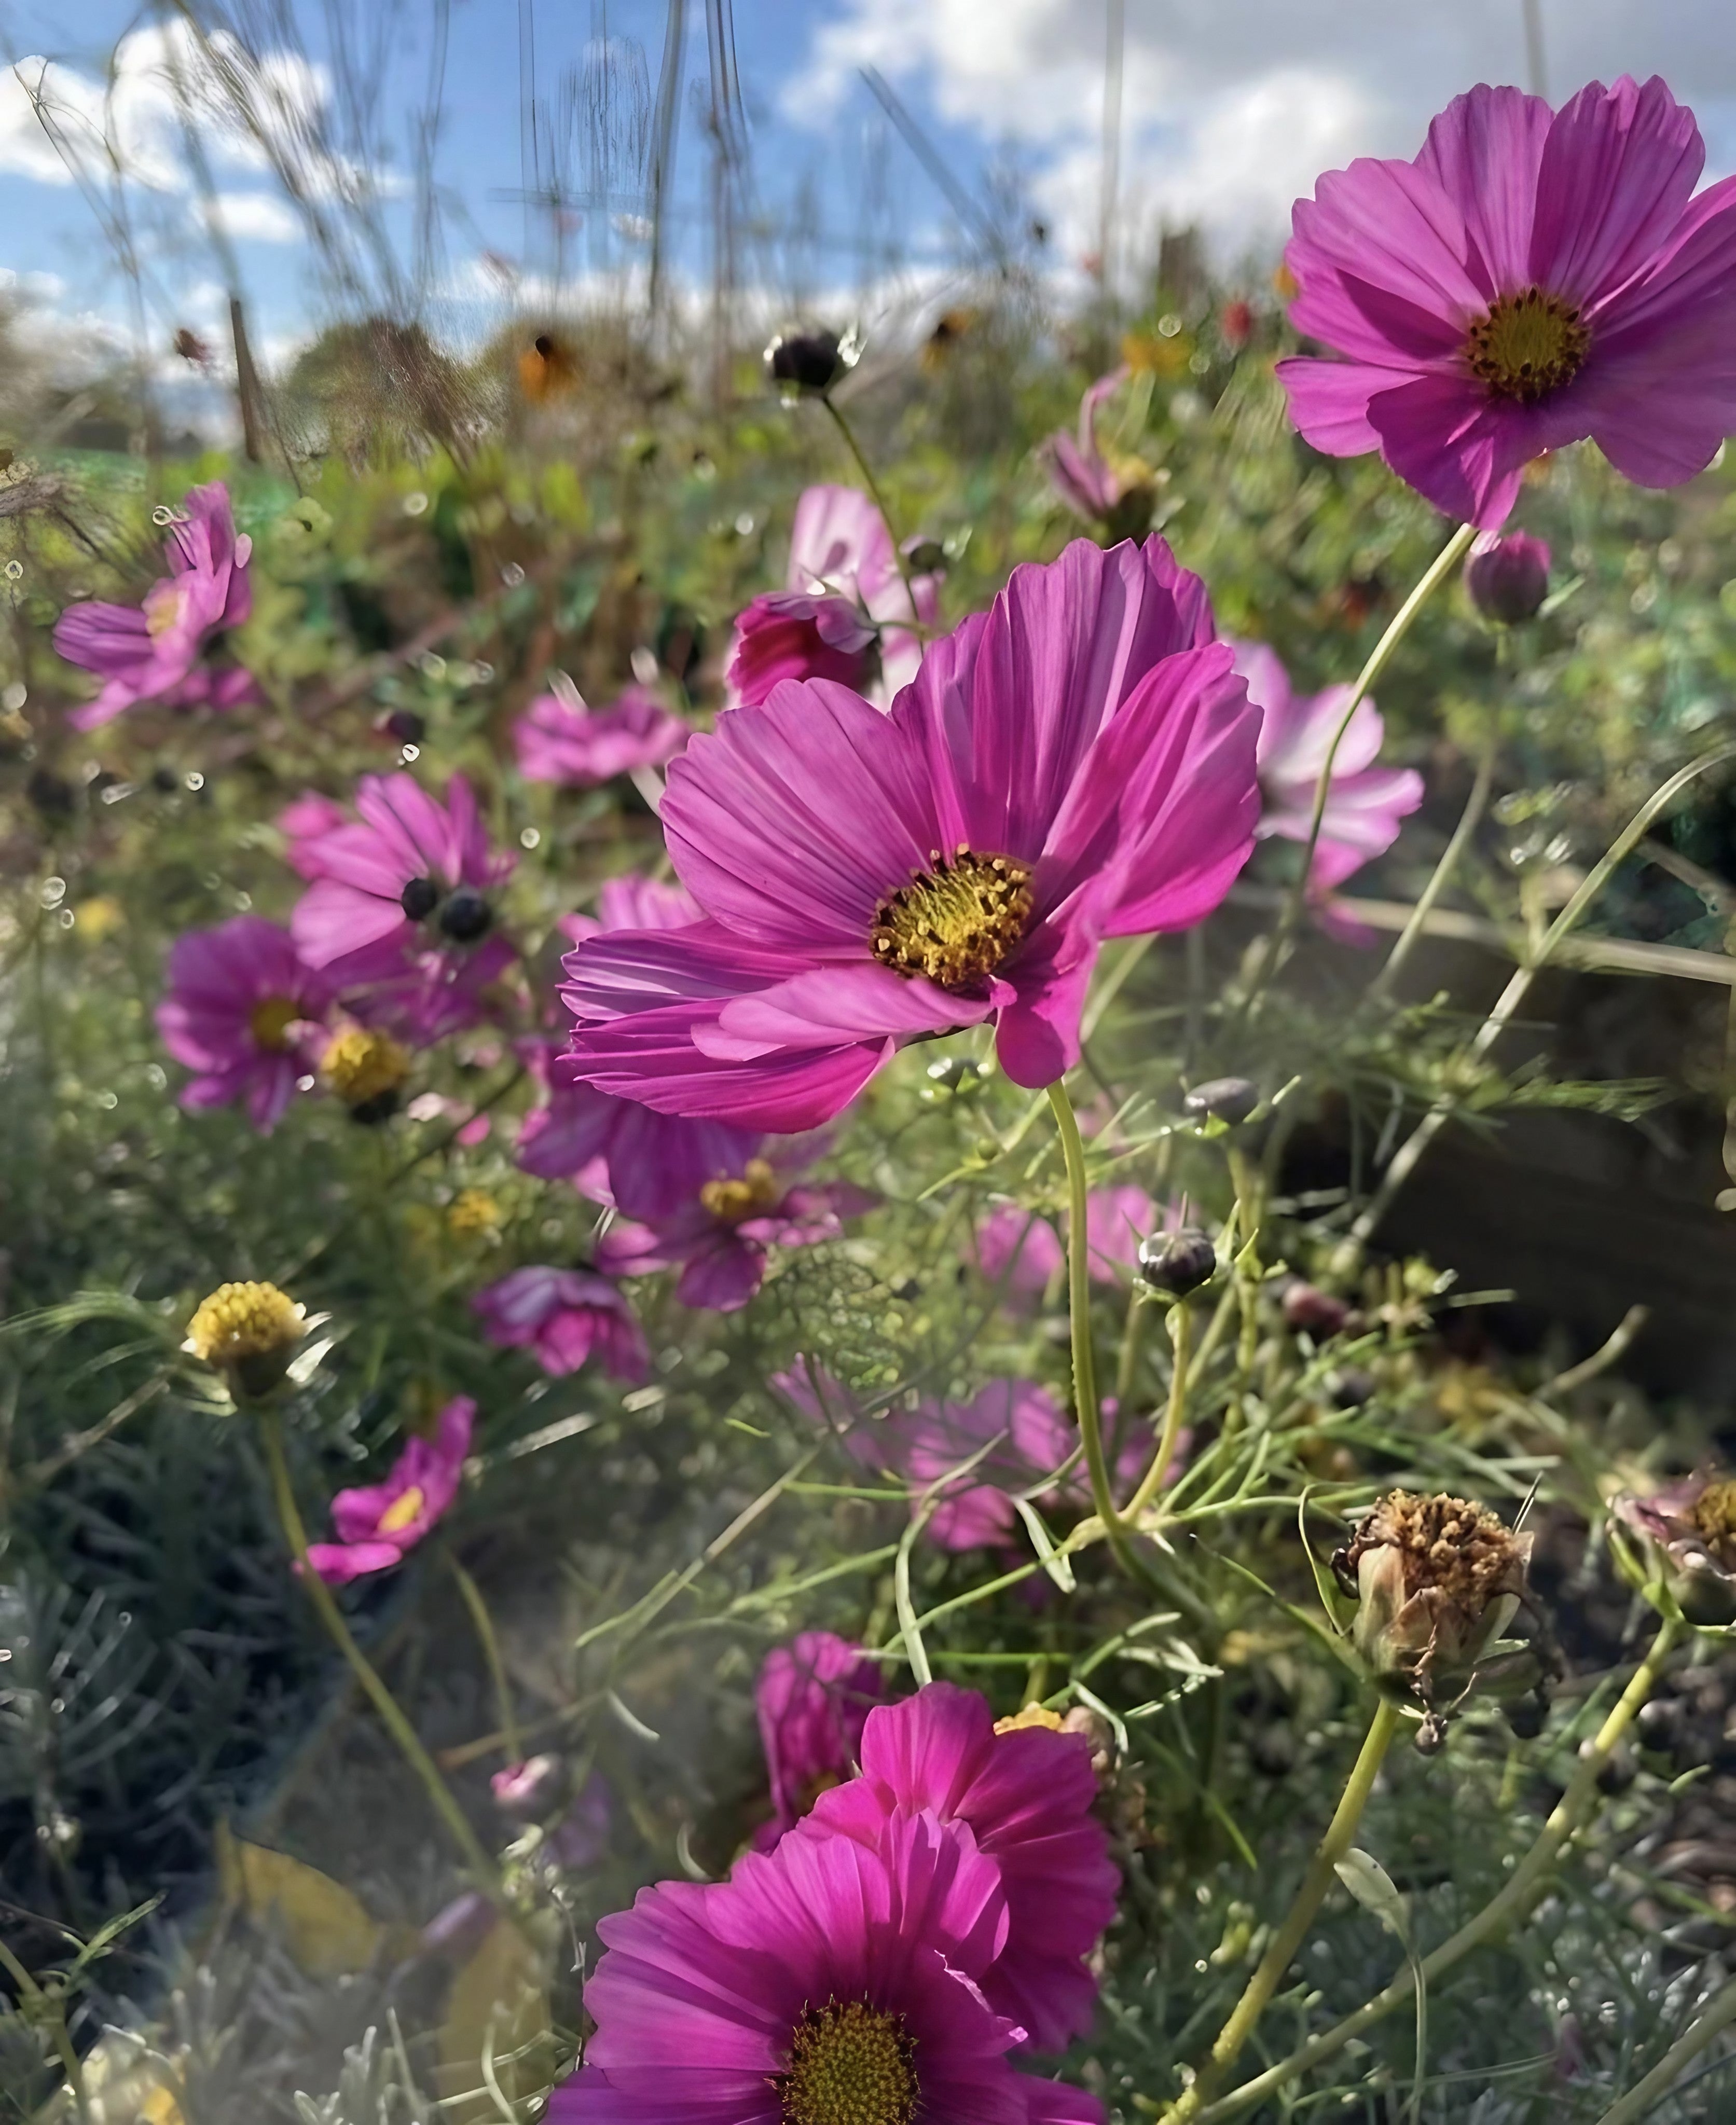 Group of Cosmos Sensation Mixed flowers with garden vegetation